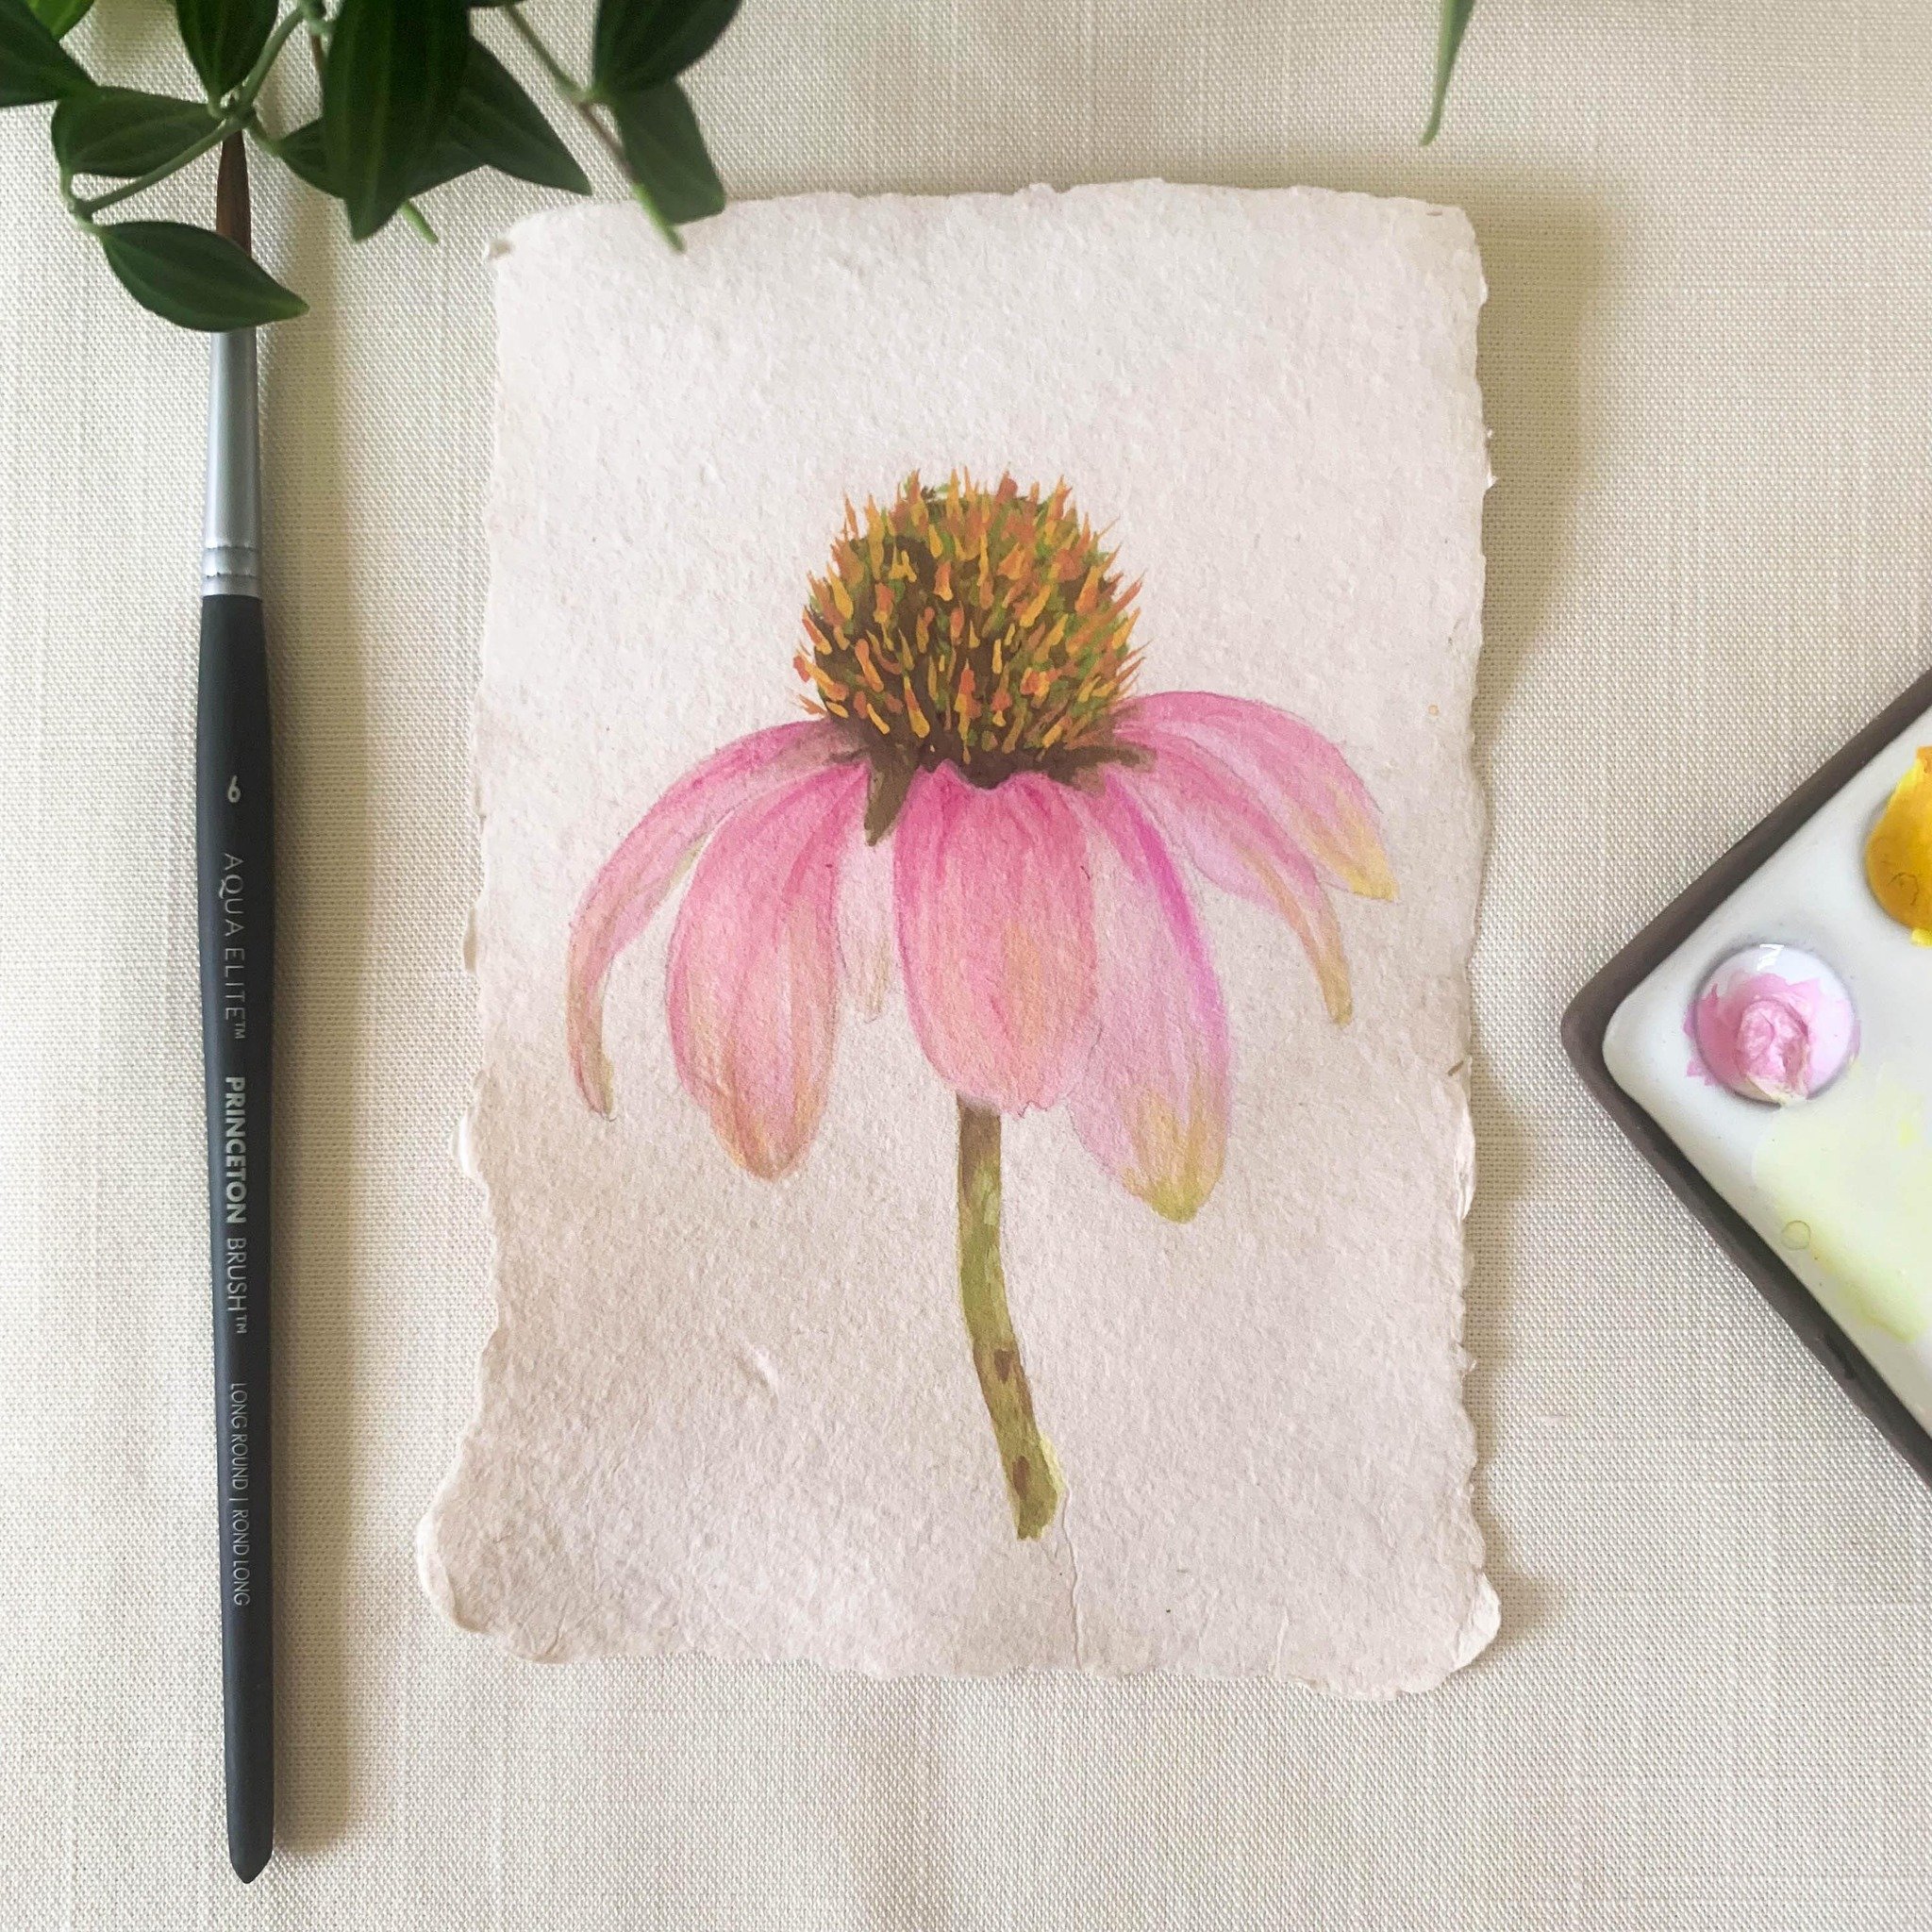 Pink Coneflower painted in gouache on handmade paper.
#coneflower #coneflowersofinstagram #pinkflowers #painting #inspiredbypetals #gouache #gouachepainting #flowerpainting #artforyourhome #handmadepaper #floralart #willowglenstationery